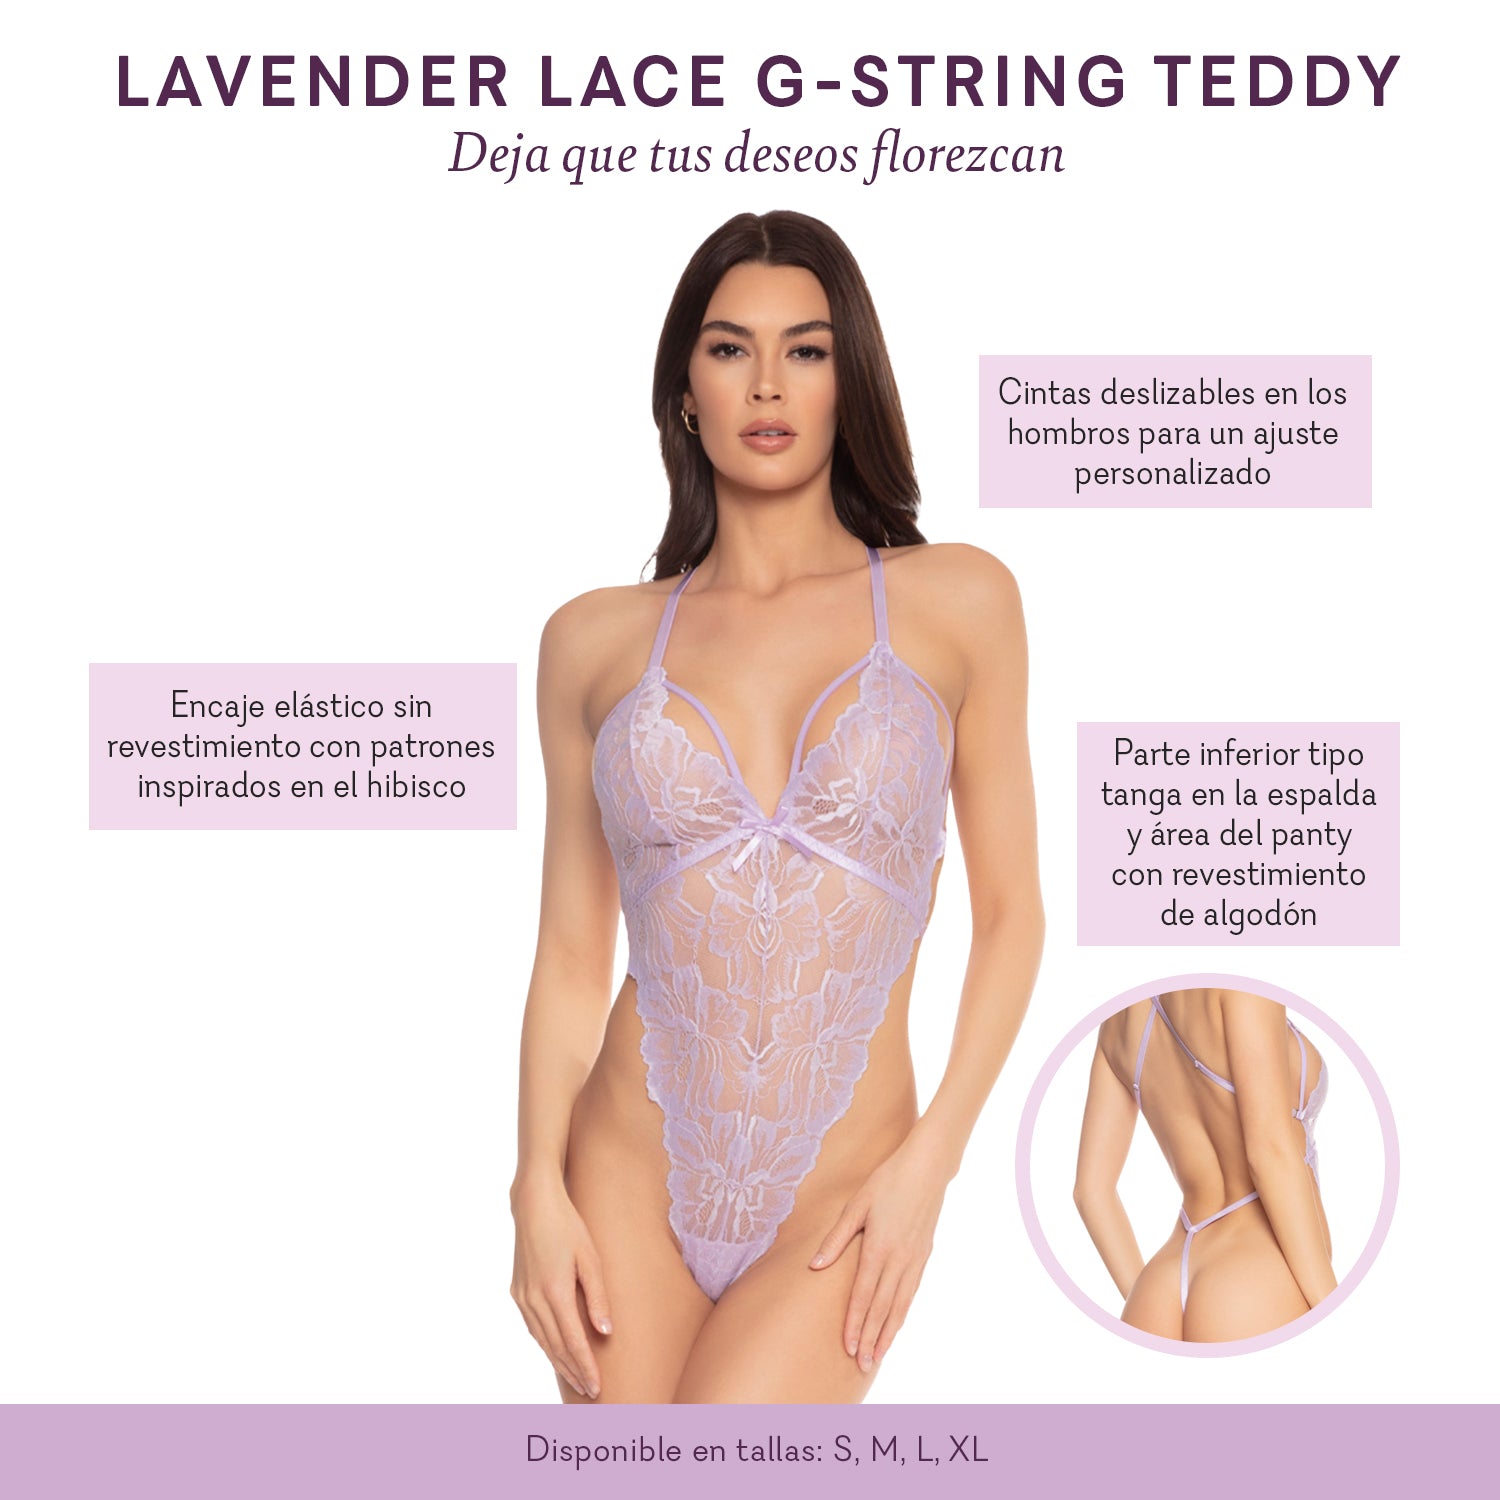 Nothing But Lace Teddy Lingerie, Teddy Lingerie with Lace